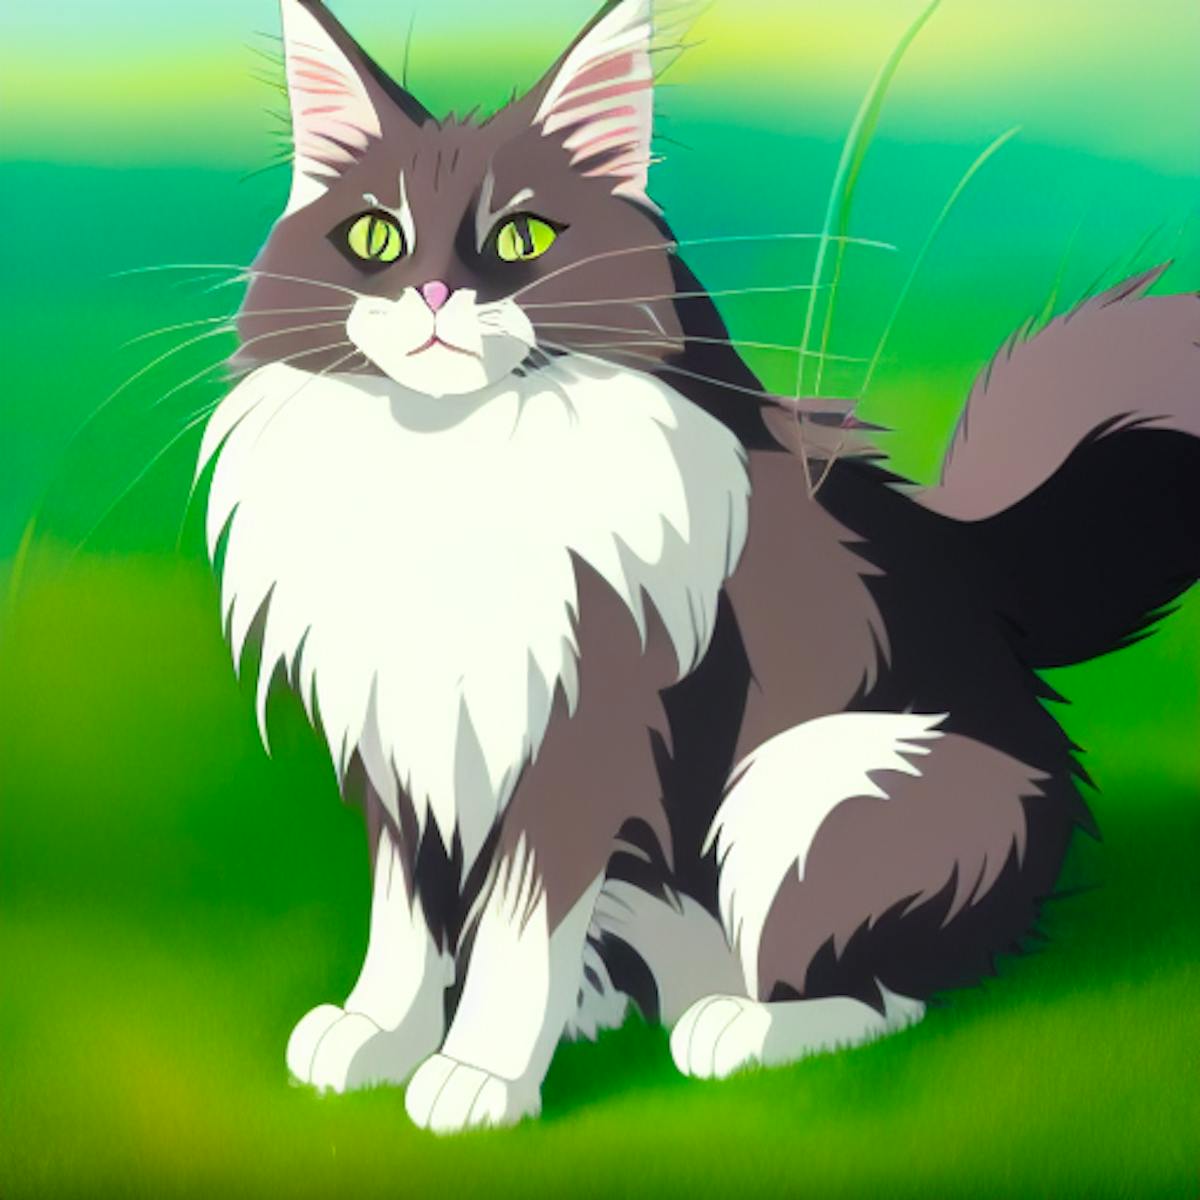 AI-rendered illustration of a cat in the style of Studio Ghibli